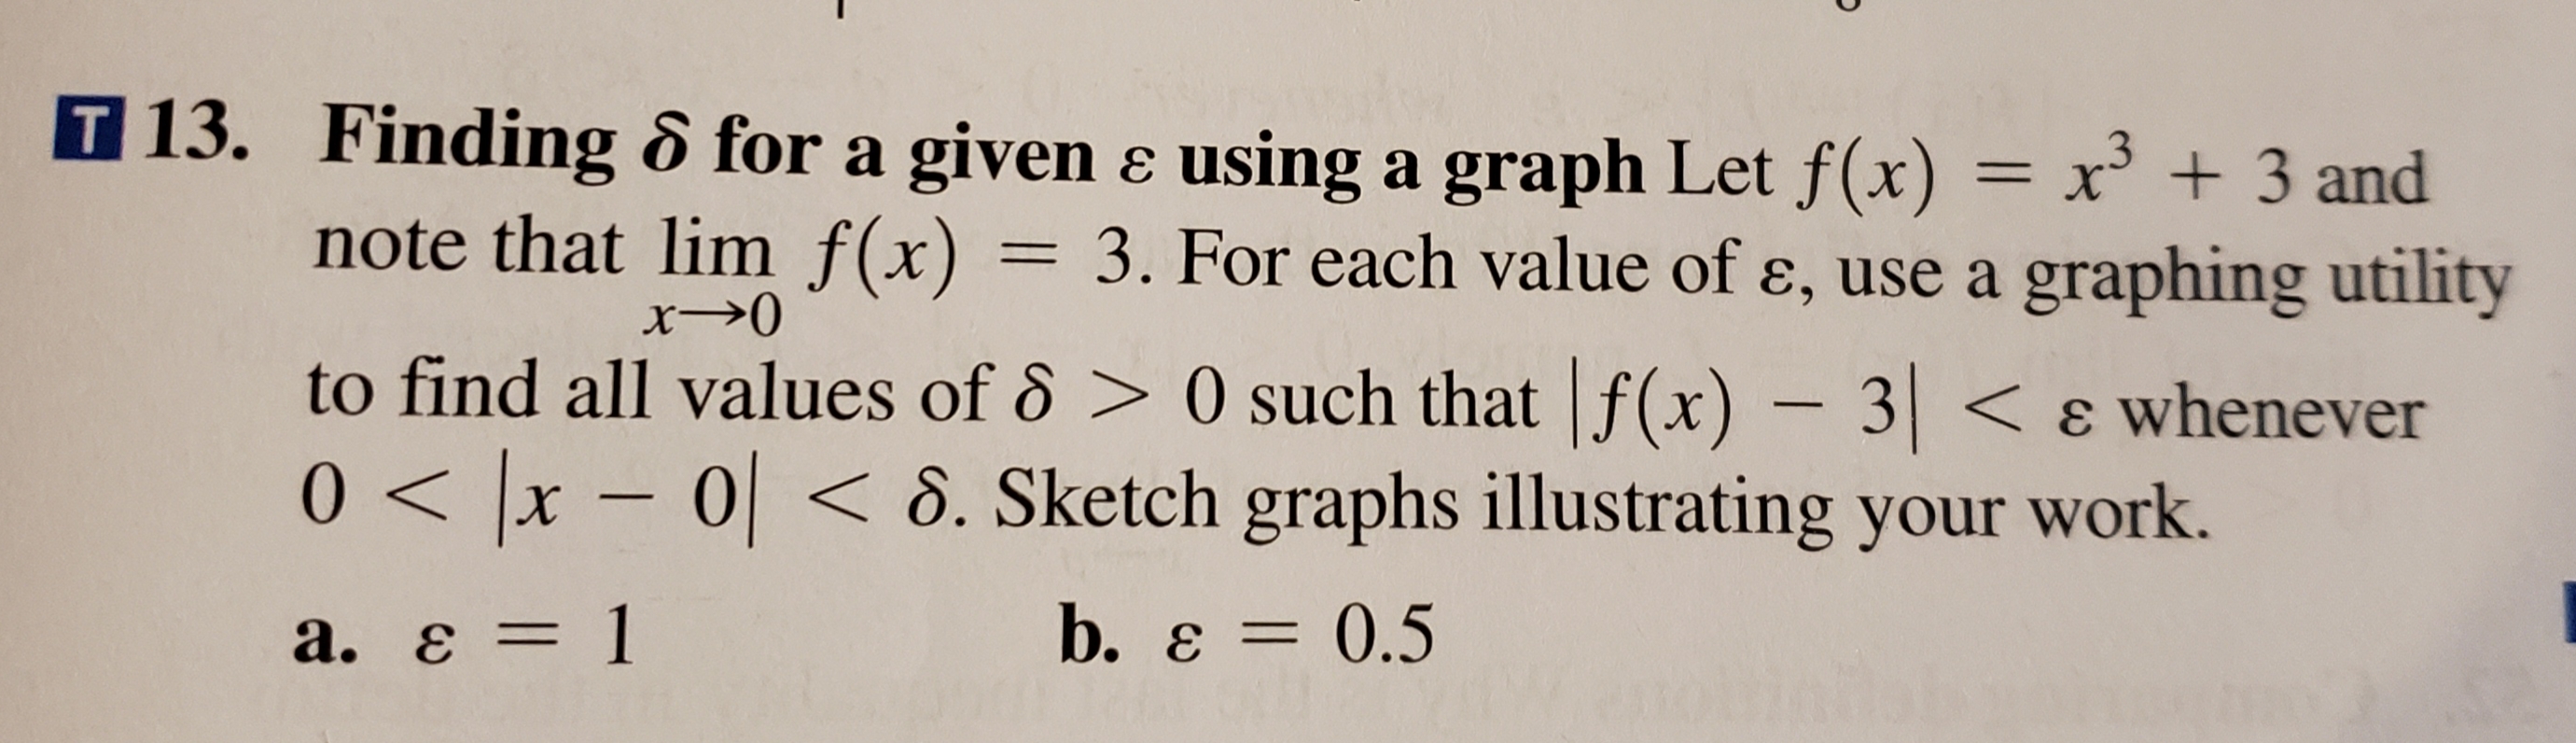 T 13. Finding 6 for a givene using a graph Let f(x) = x + 3 and
note that lim f(x)
3. For each value of e, use a graphing utility
1
x0
to find all values of 6> 0 such that f(x) - 3< 8 whenever
0x-0< 8. Sketch graphs illustrating your work.
b. e 0.5
а. Е — 1
